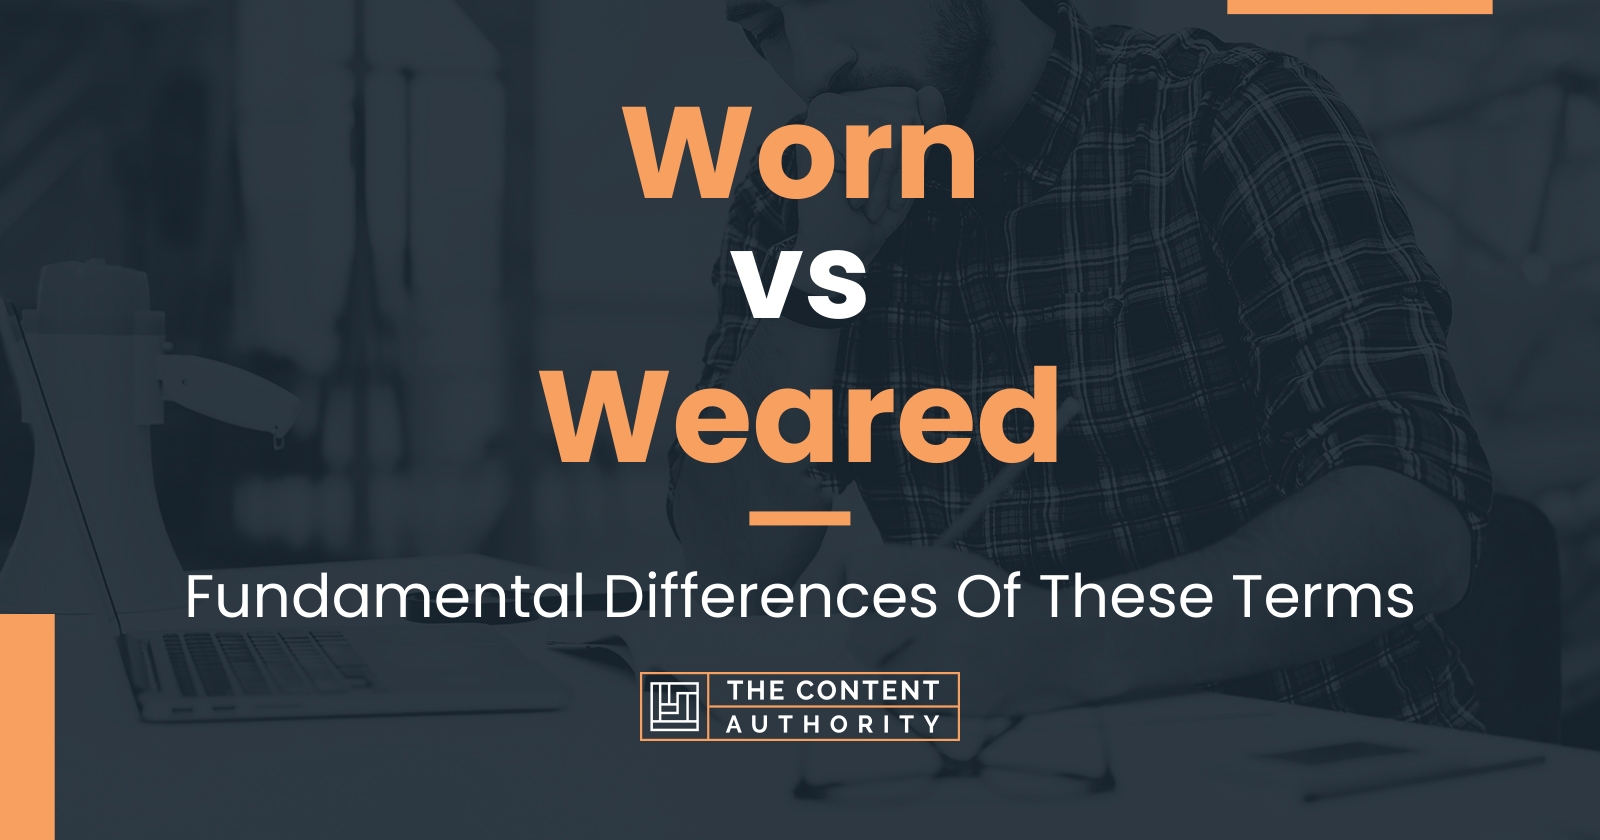 Worn vs Weared: Fundamental Differences Of These Terms